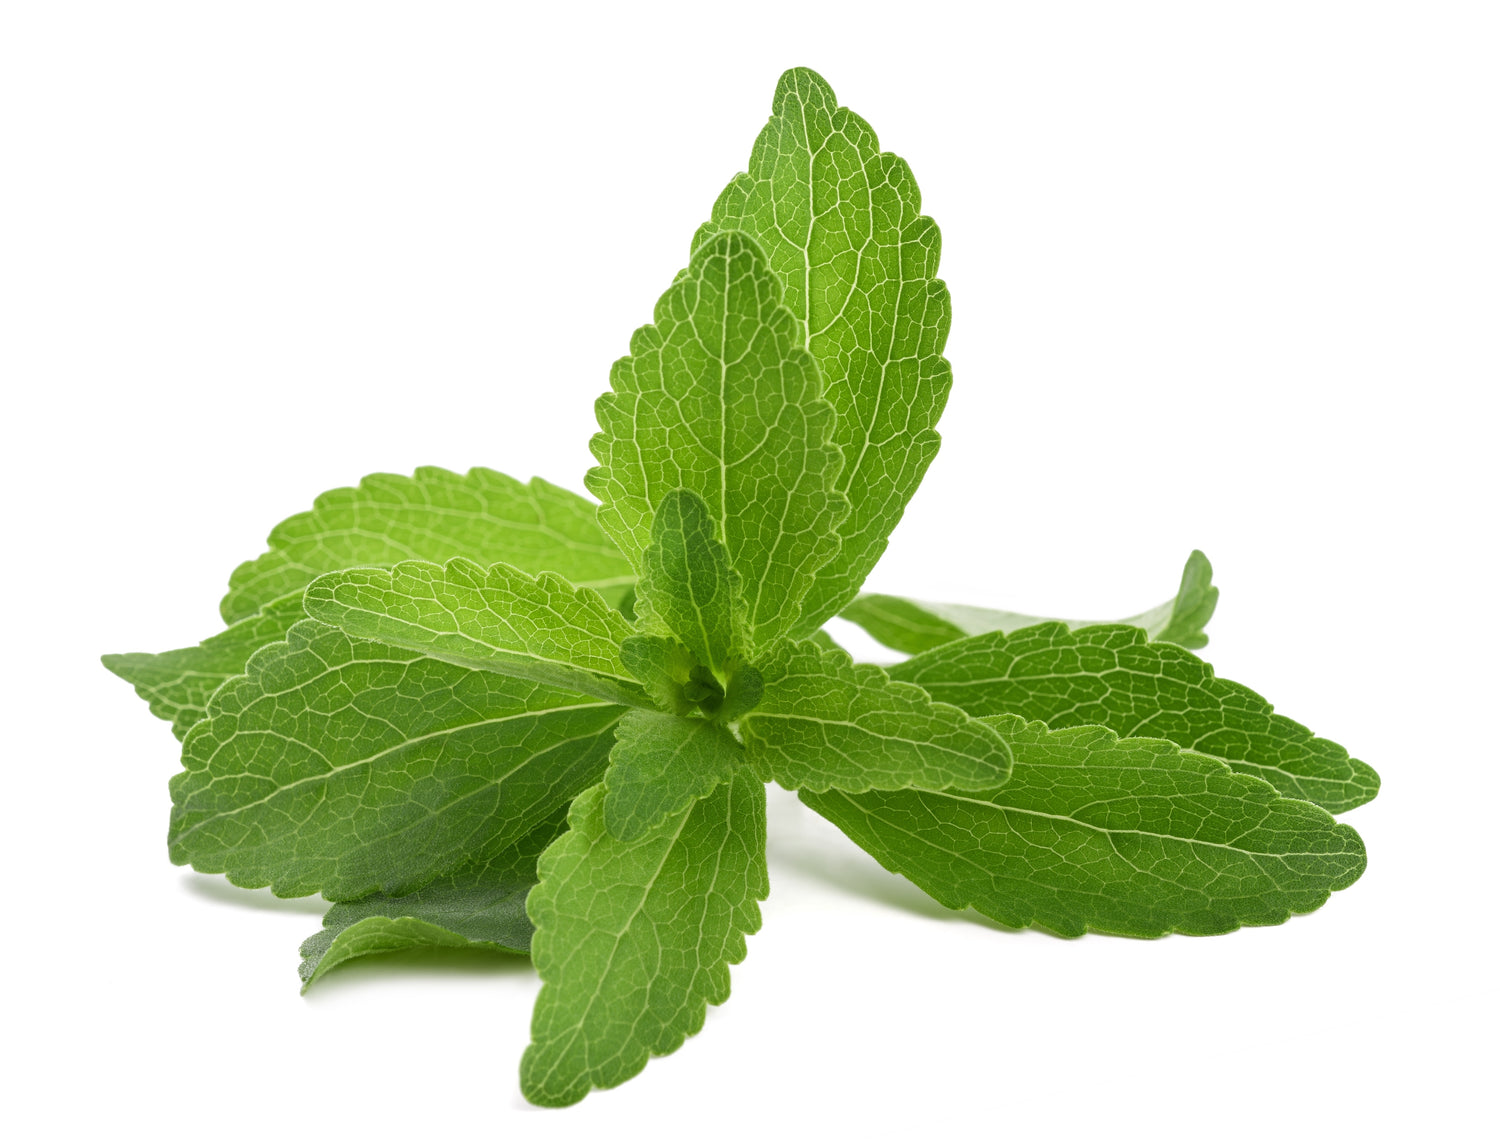 Our Liquid Stevia Drops are made with &gt;95% pure Steviol glycosides - one of the purest products in the market.